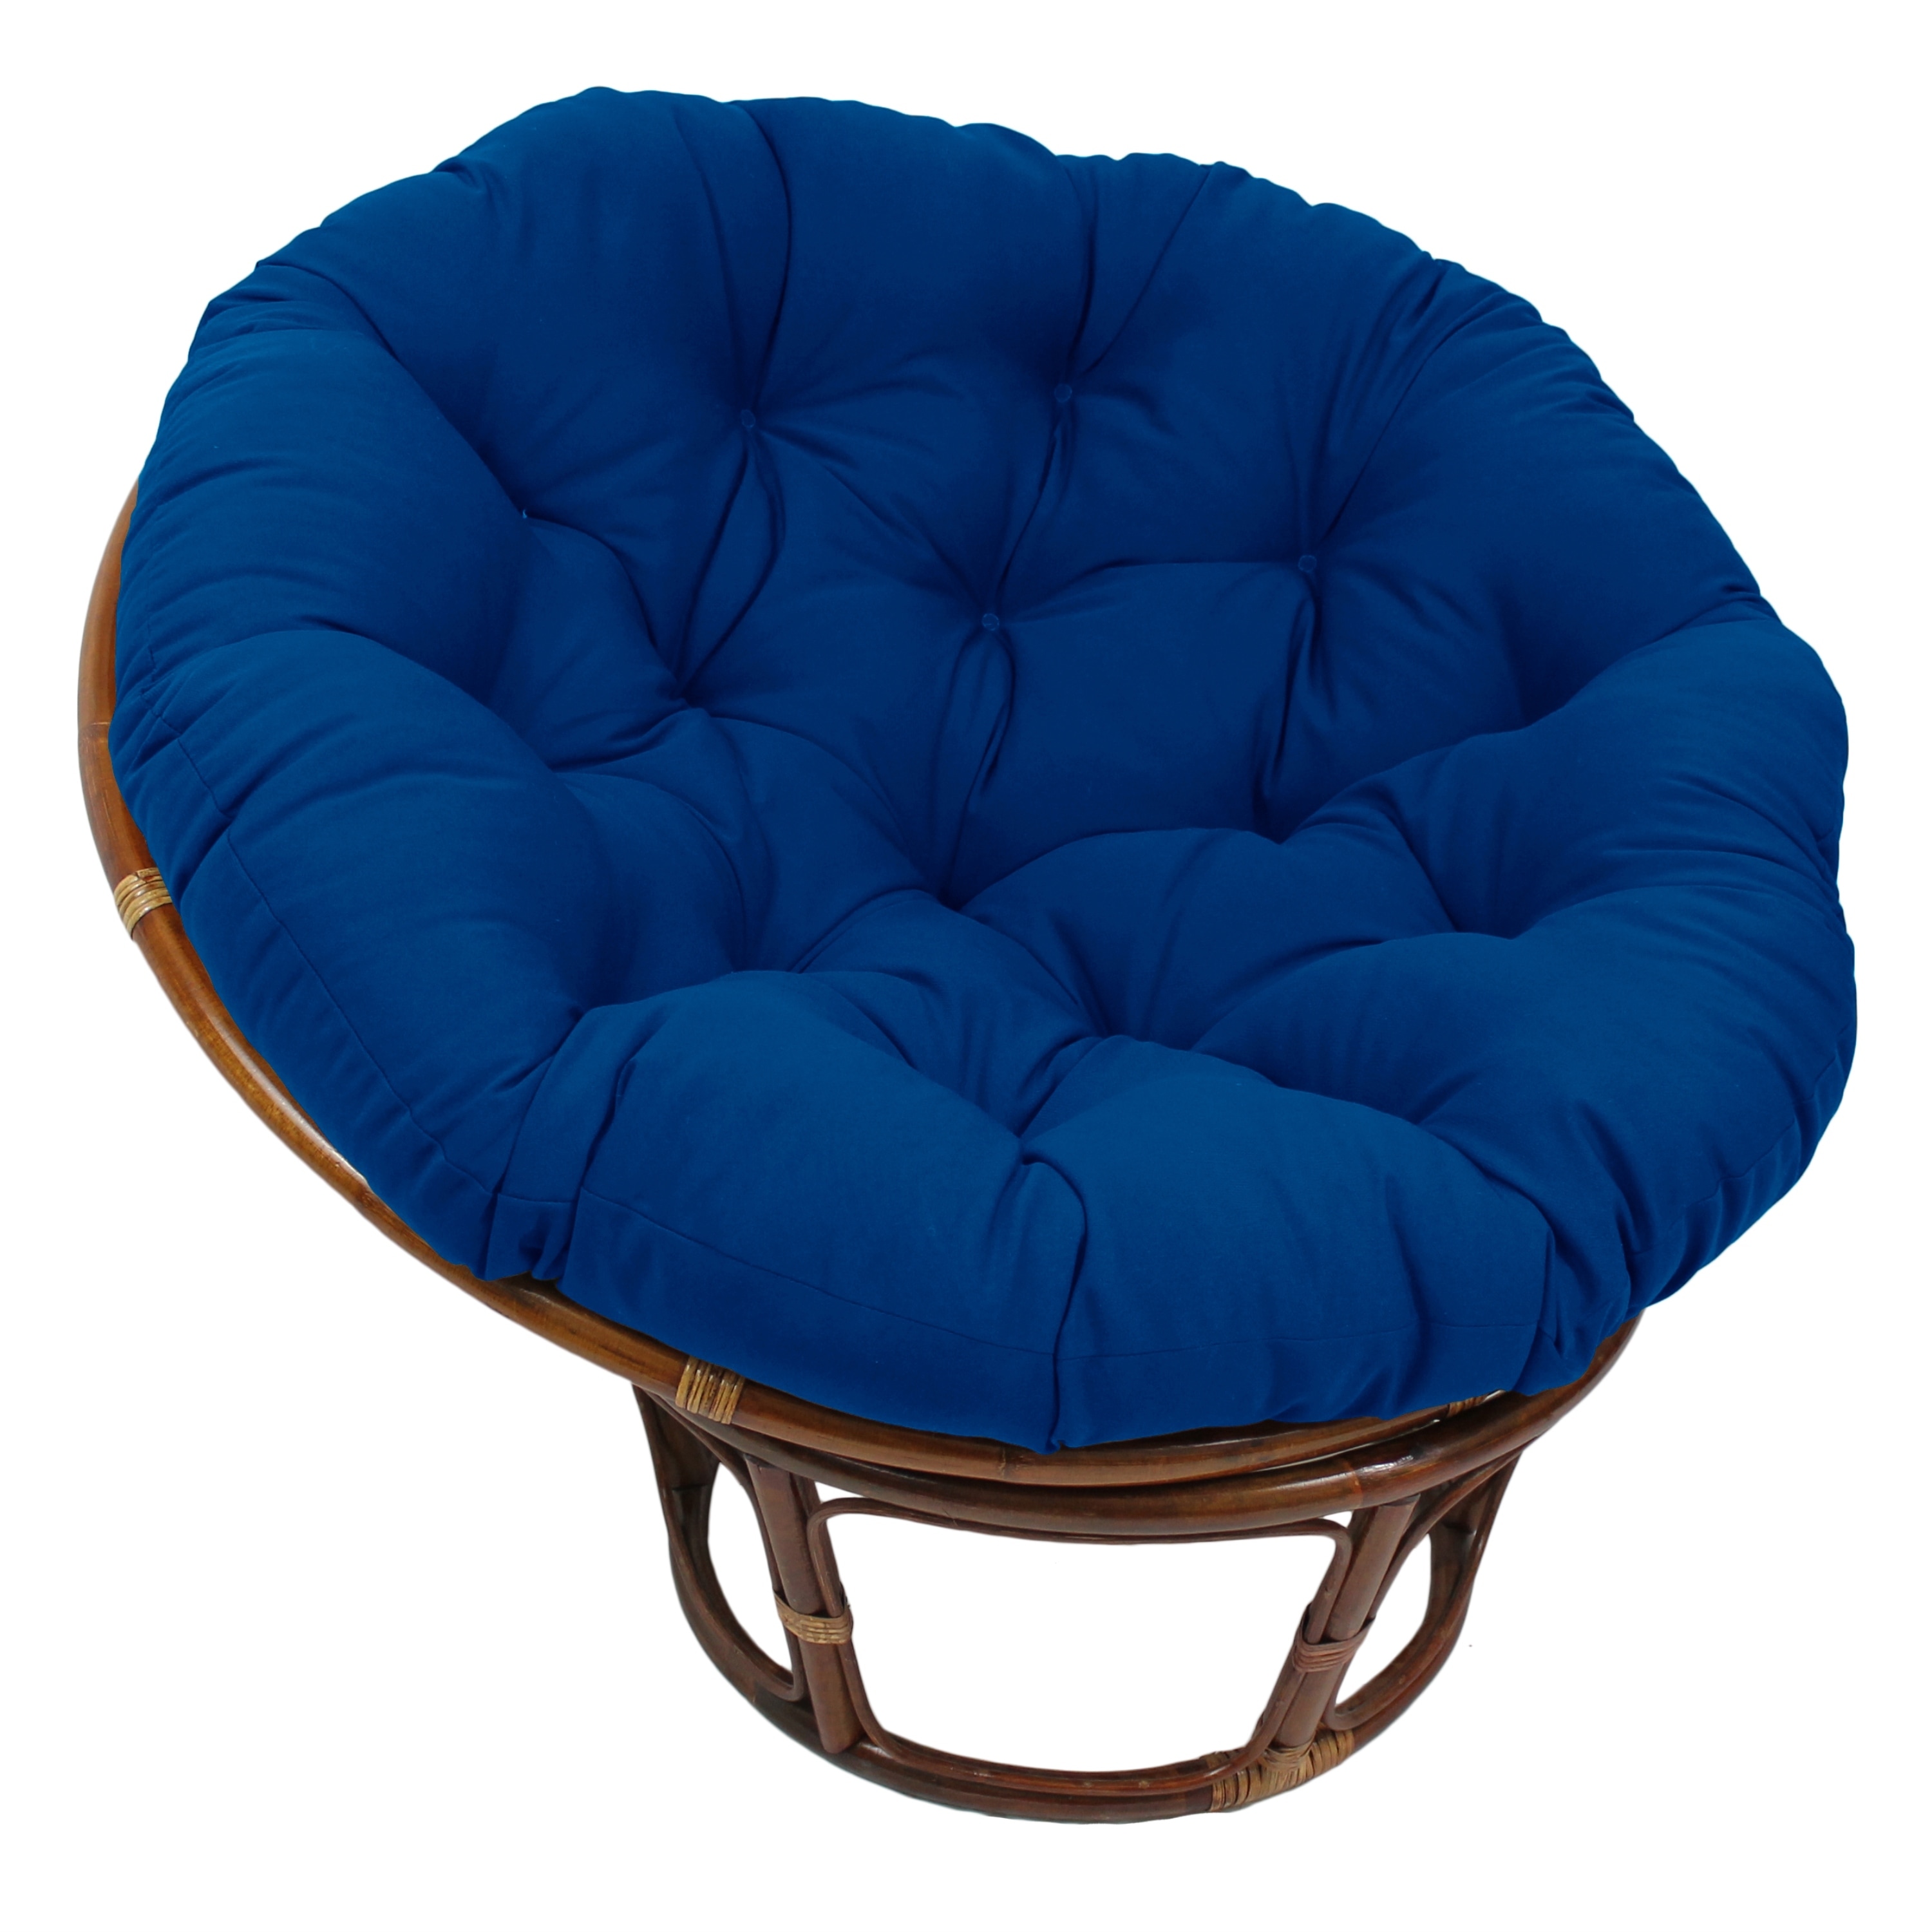 https://ak1.ostkcdn.com/images/products/is/images/direct/57a932389fb88be1d855cbdf929c57f2963b39ad/52-inch-Solid-Twill-Papasan-Cushion-%28Cushion-Only%29.jpg